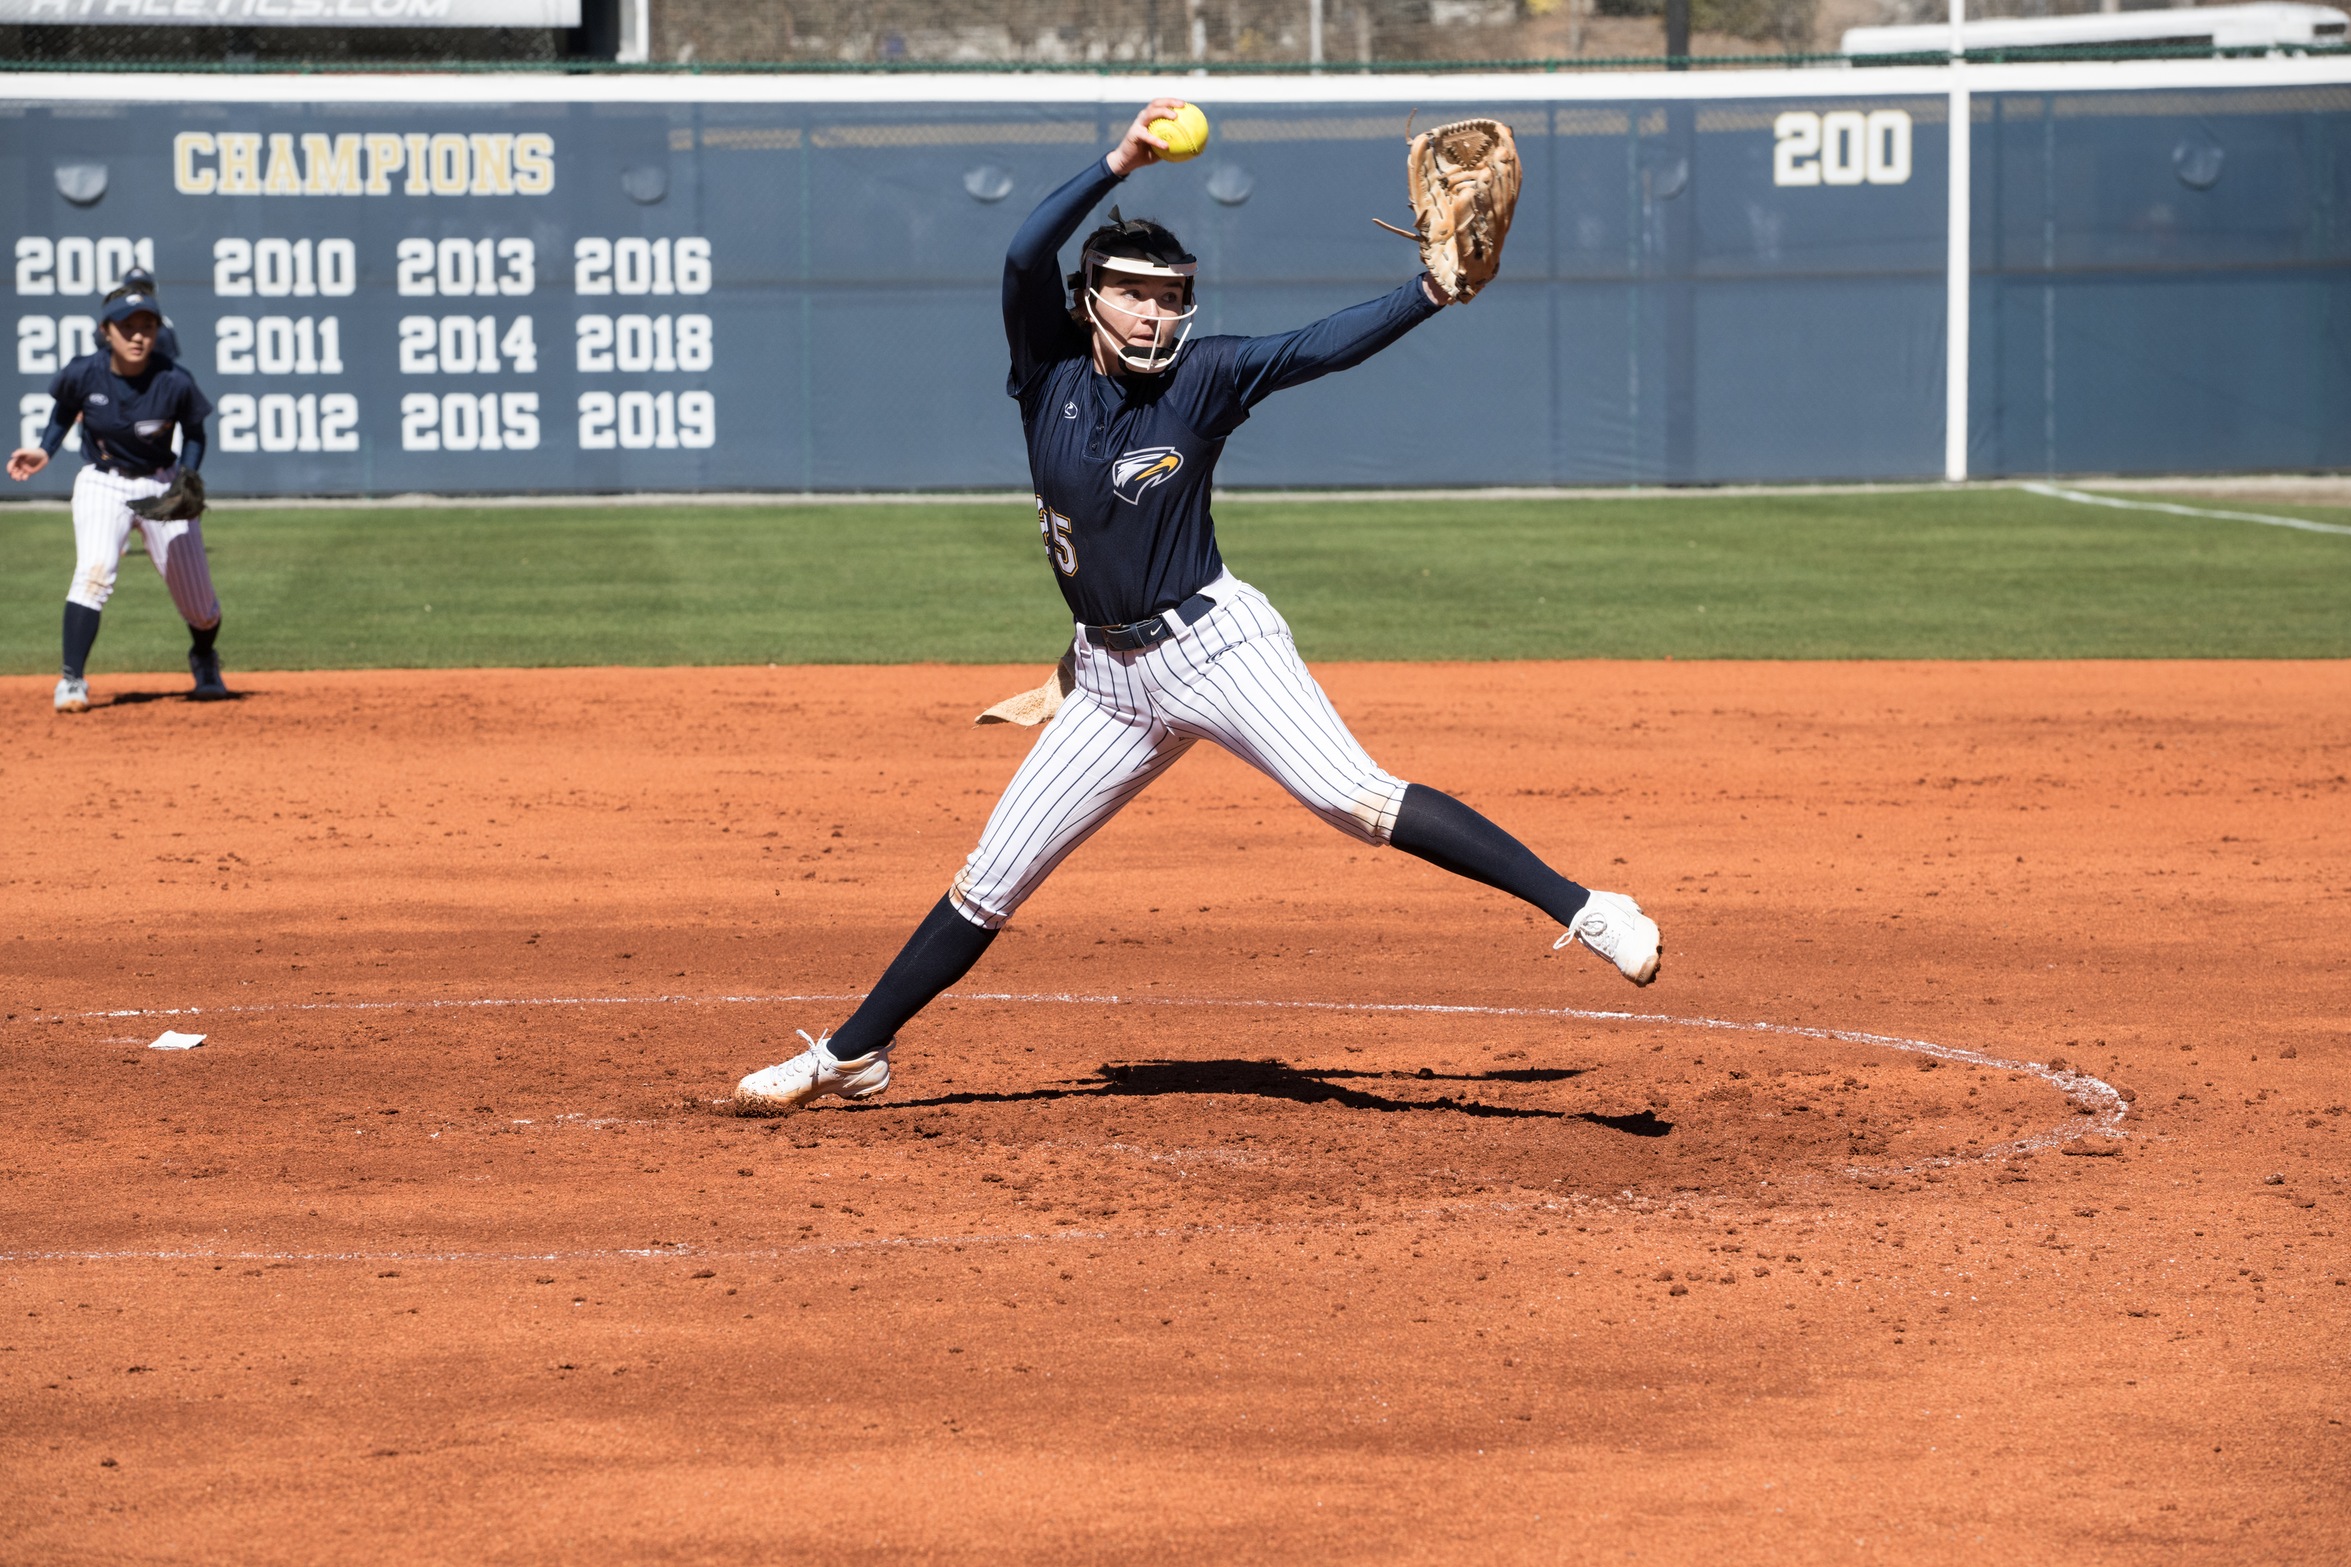 Softball Musters Late Inning Rally to Defeat Piedmont 10-6